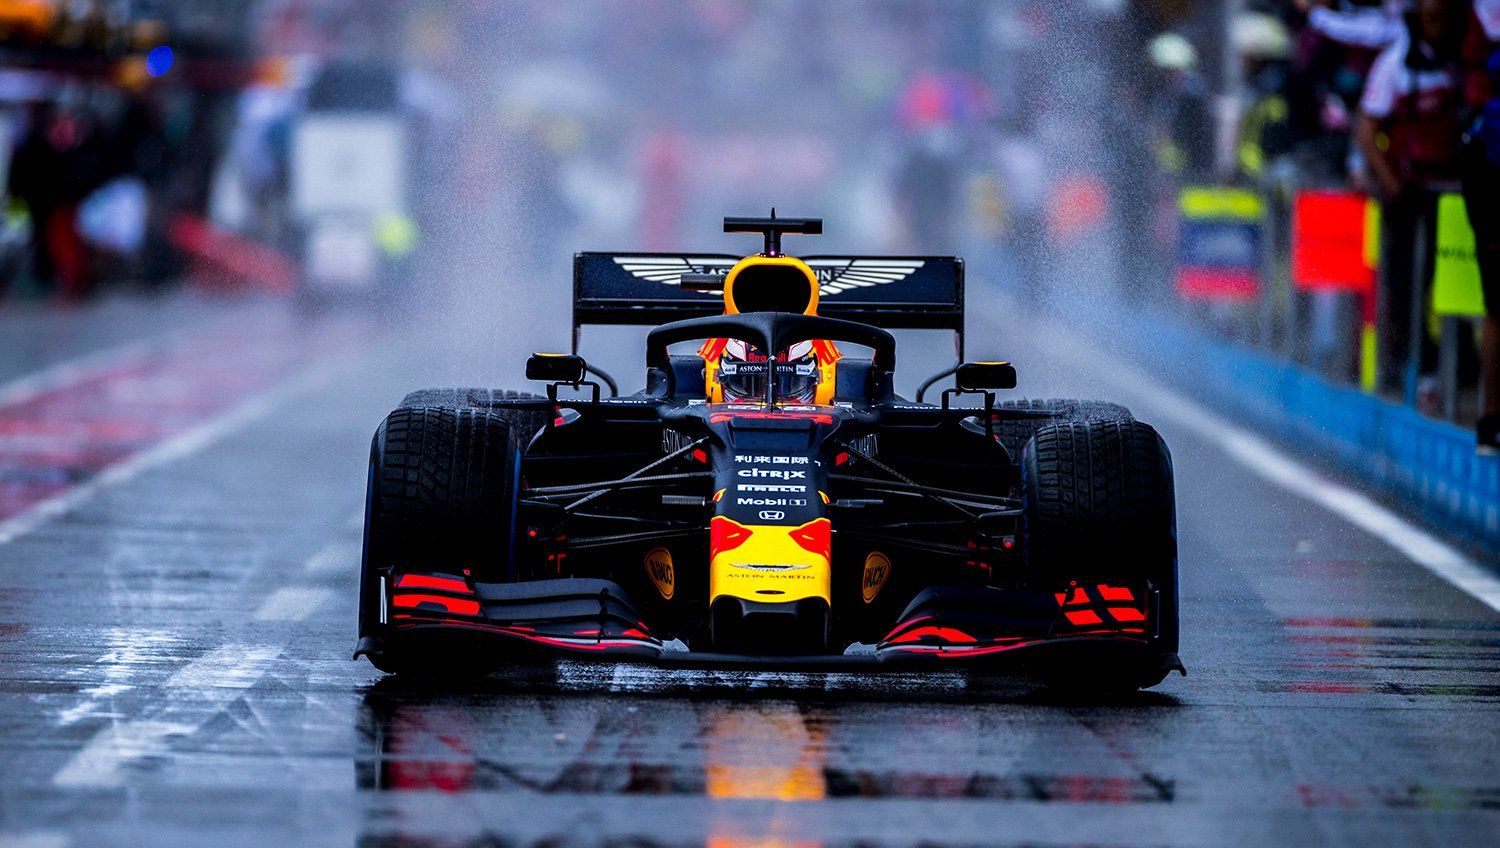 F1 Red Bull 2021 Wallpapers - Wallpaper Cave